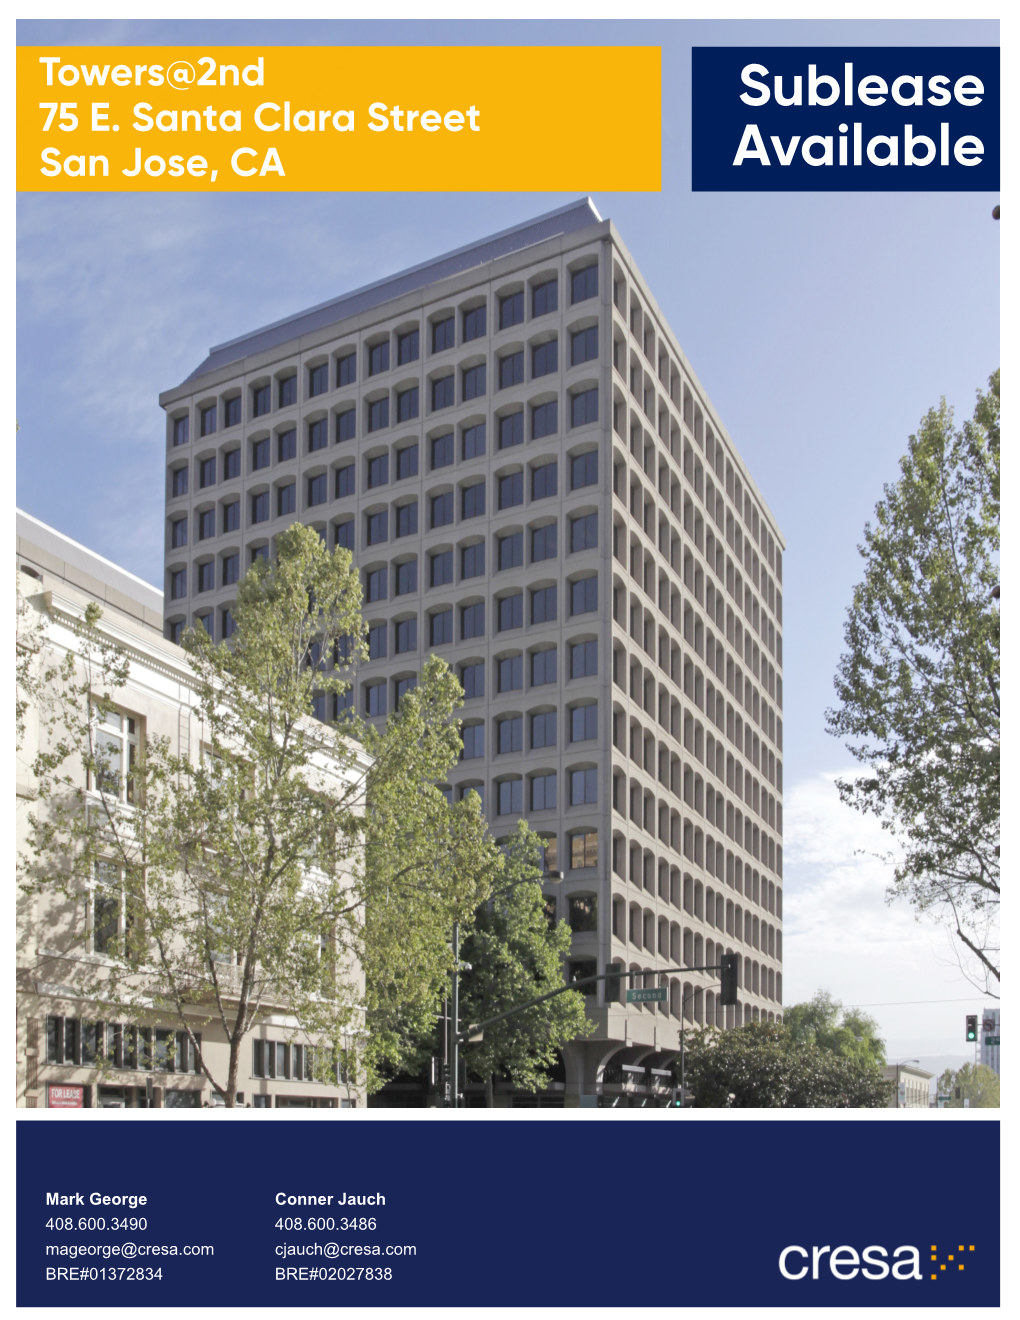 Sublease Available